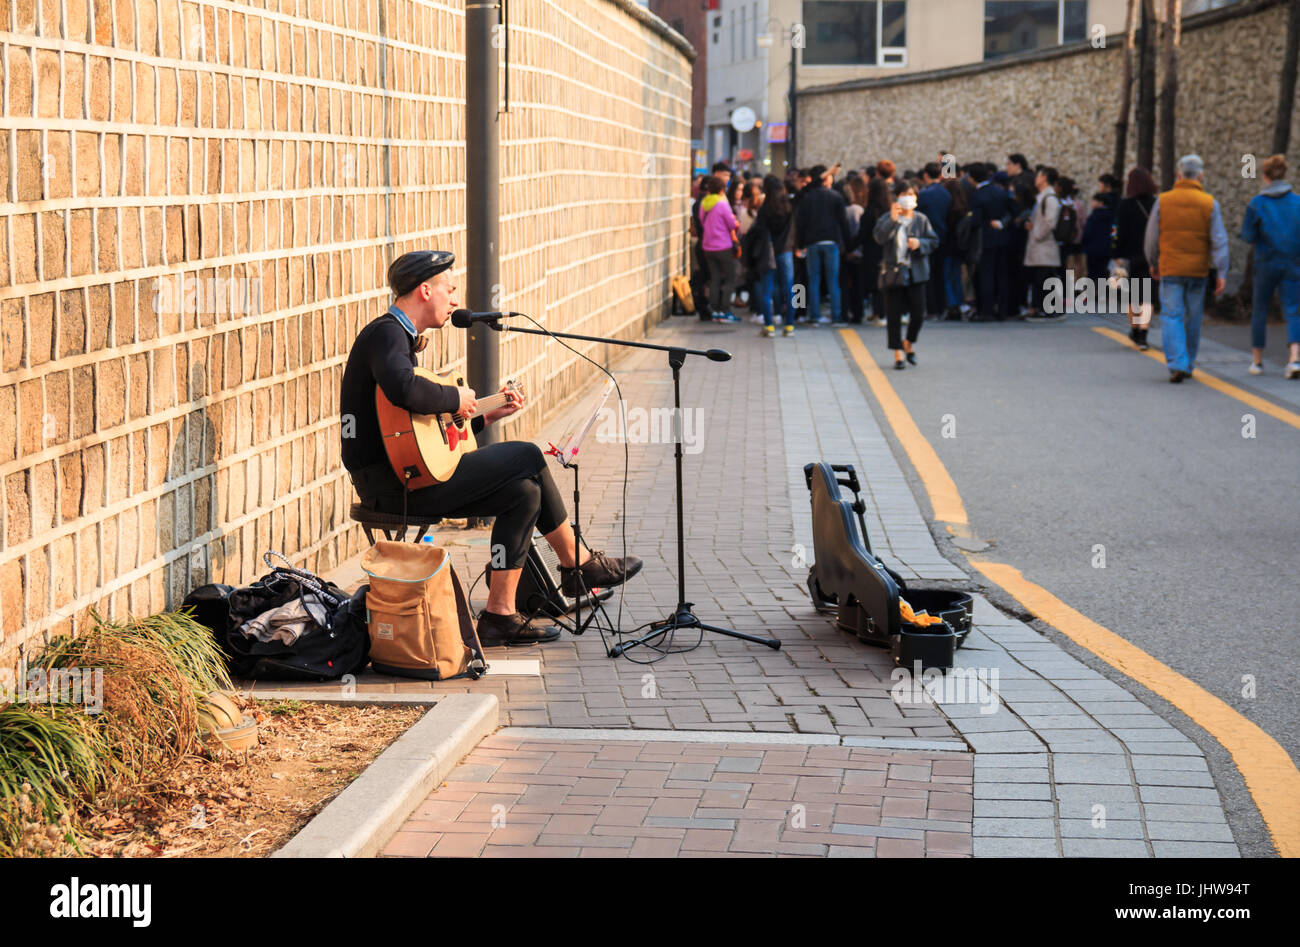 Seoul, south Korea - Mar 19, 2017: A young man busking with guitar and microphone in Insadong street. Stock Photo